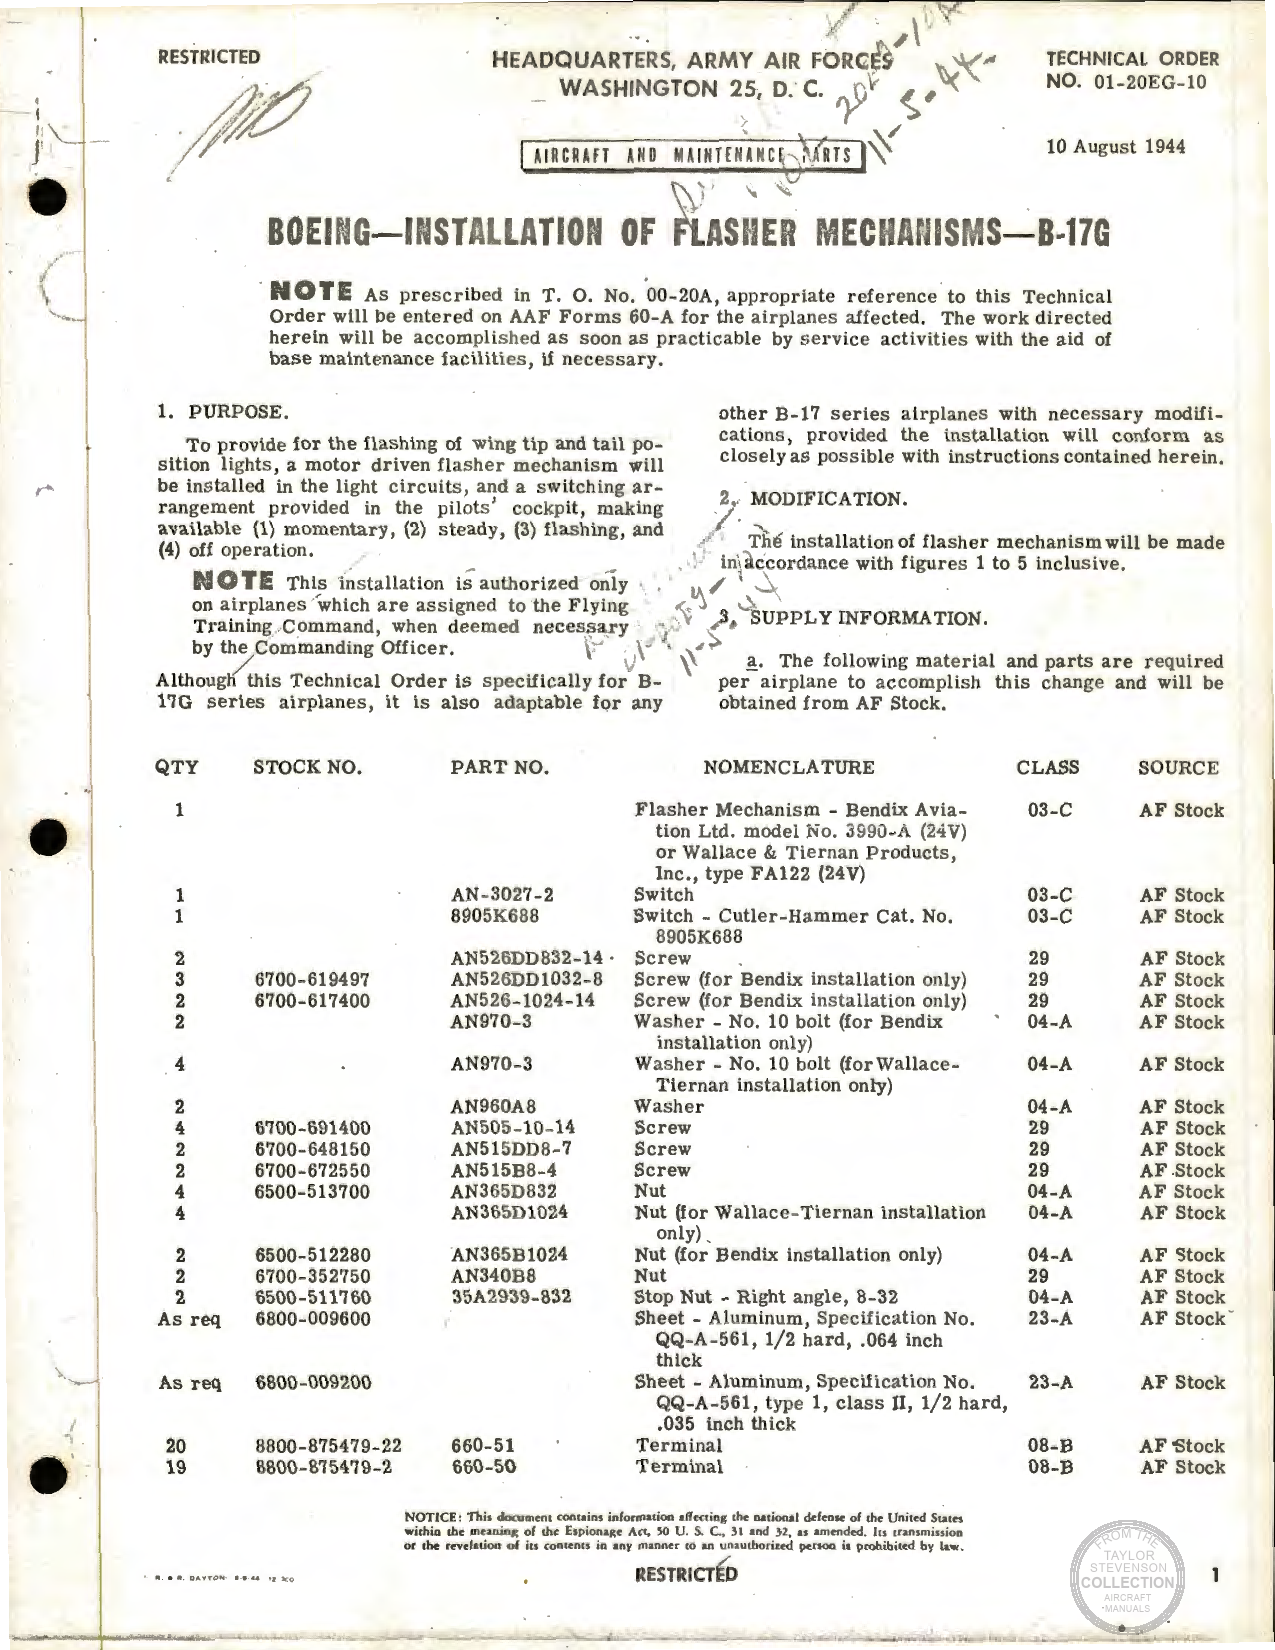 Sample page 1 from AirCorps Library document: Installation of Flasher Mechanisms for B-17G